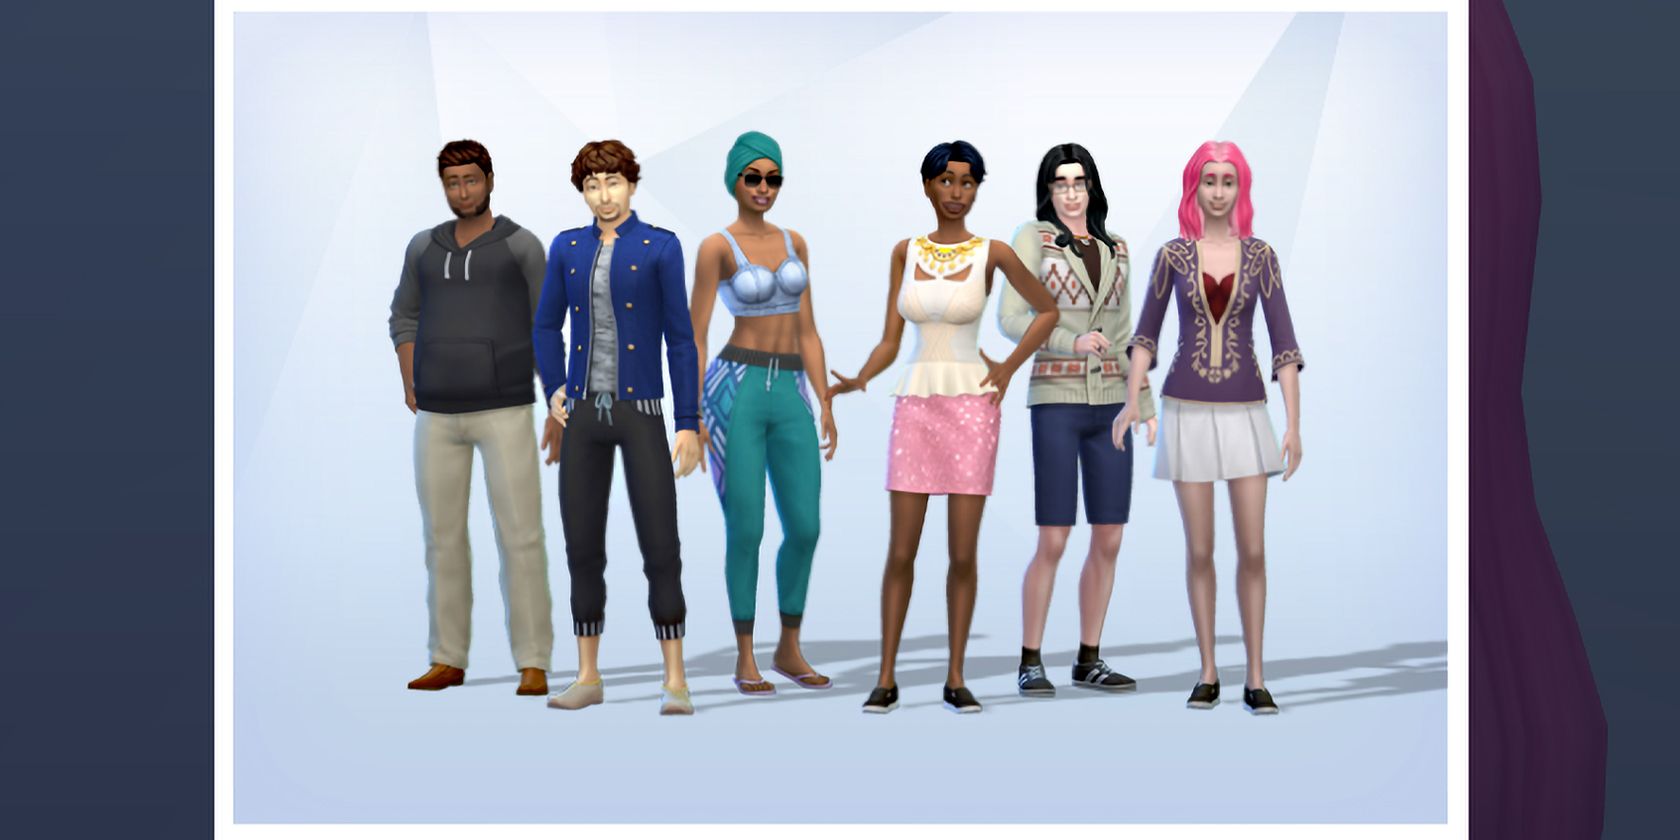 A Diversified The Sims 4 Household